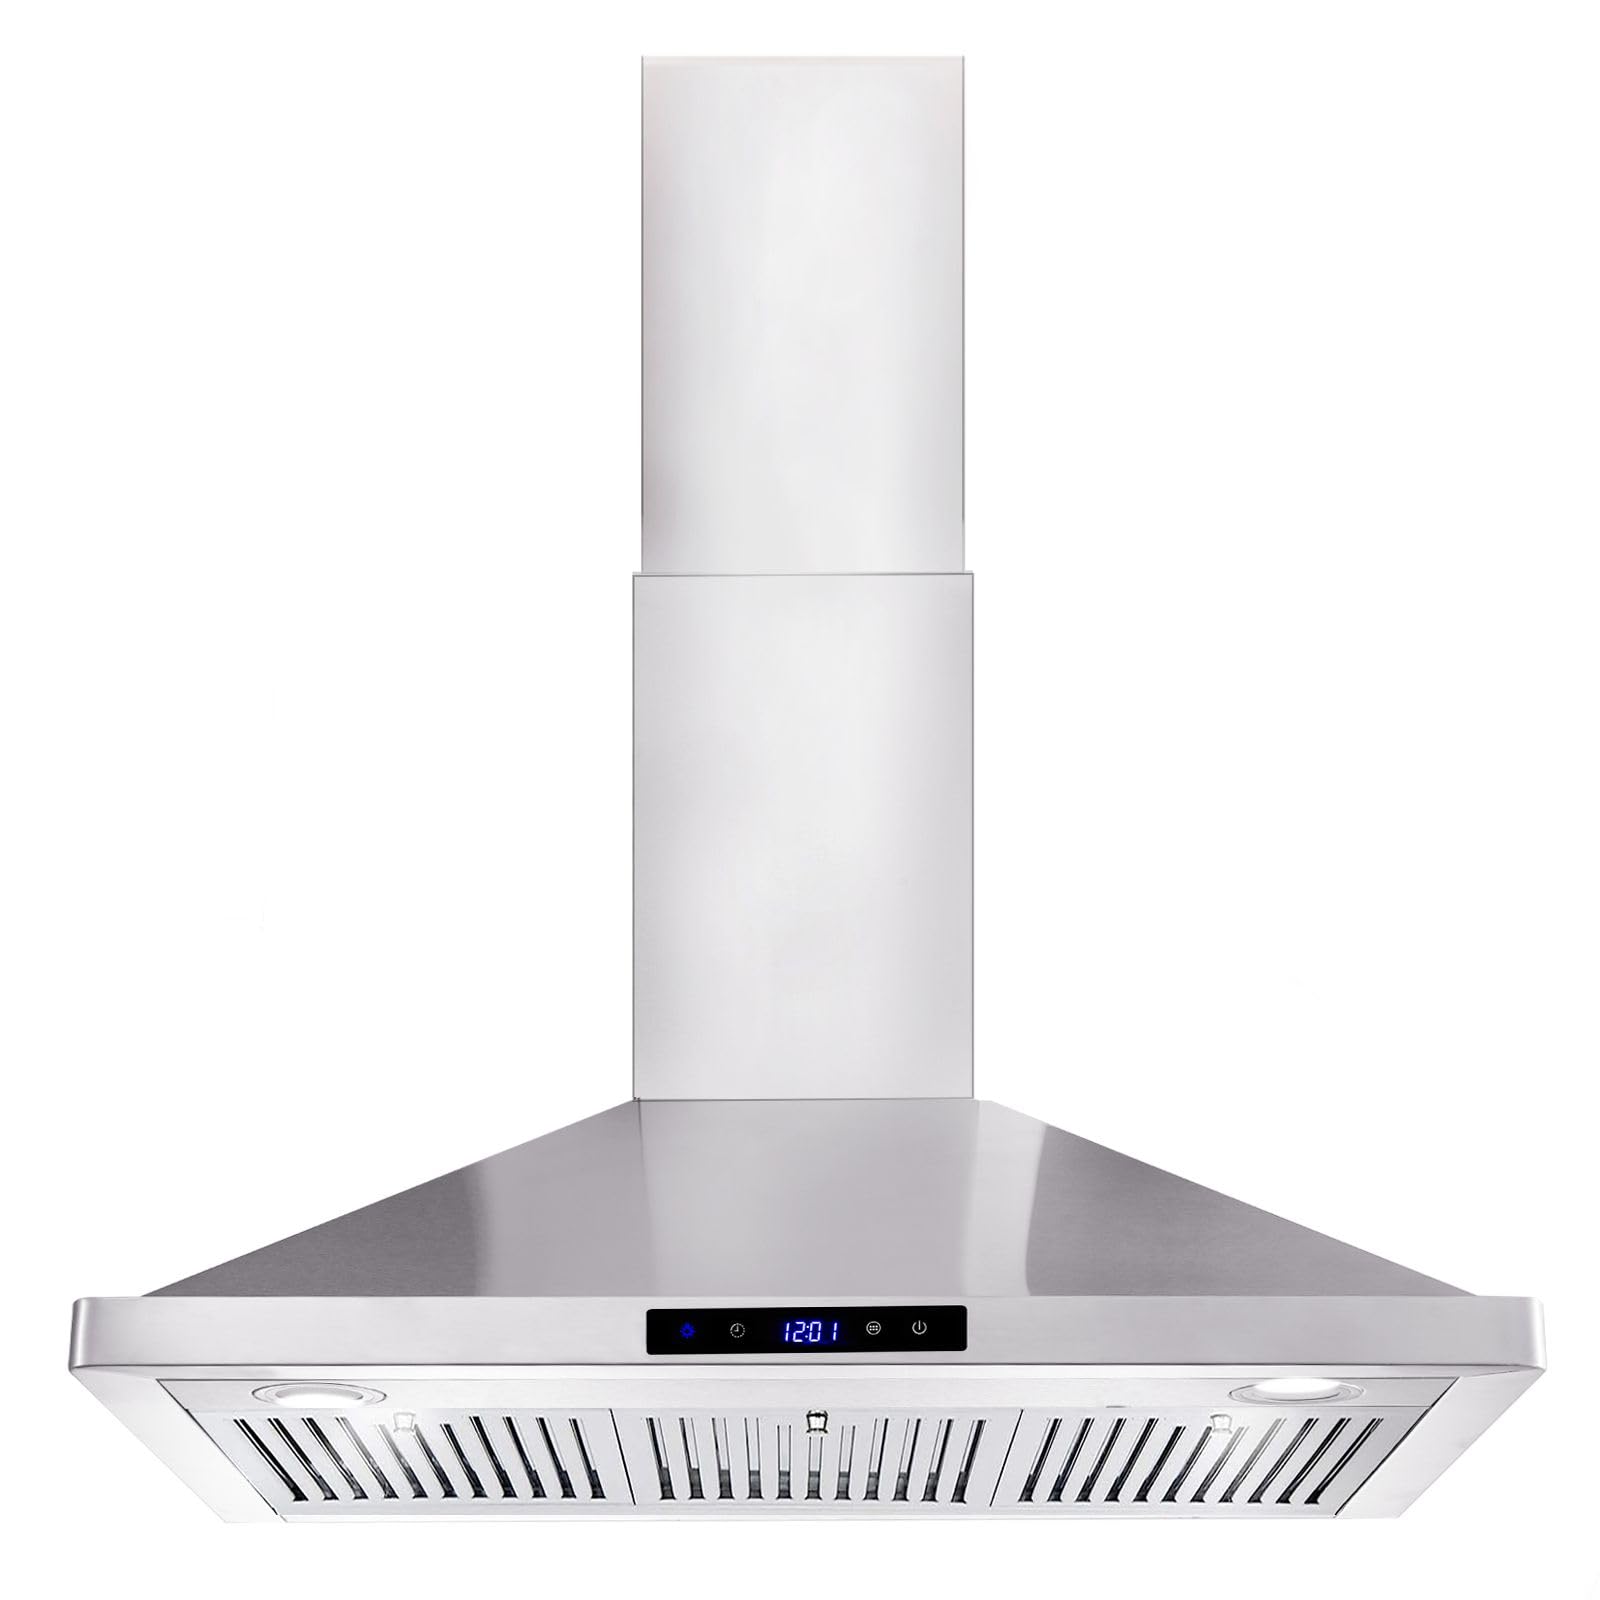 Tieasy Range Hood 36 inch Wall Mount Kitchen Hood 700 CFM with Ducted/Ductless Convertible Duct, Touch Control, Permanent Filters, Stainless Steel, 3 Speed Exhaust Fan